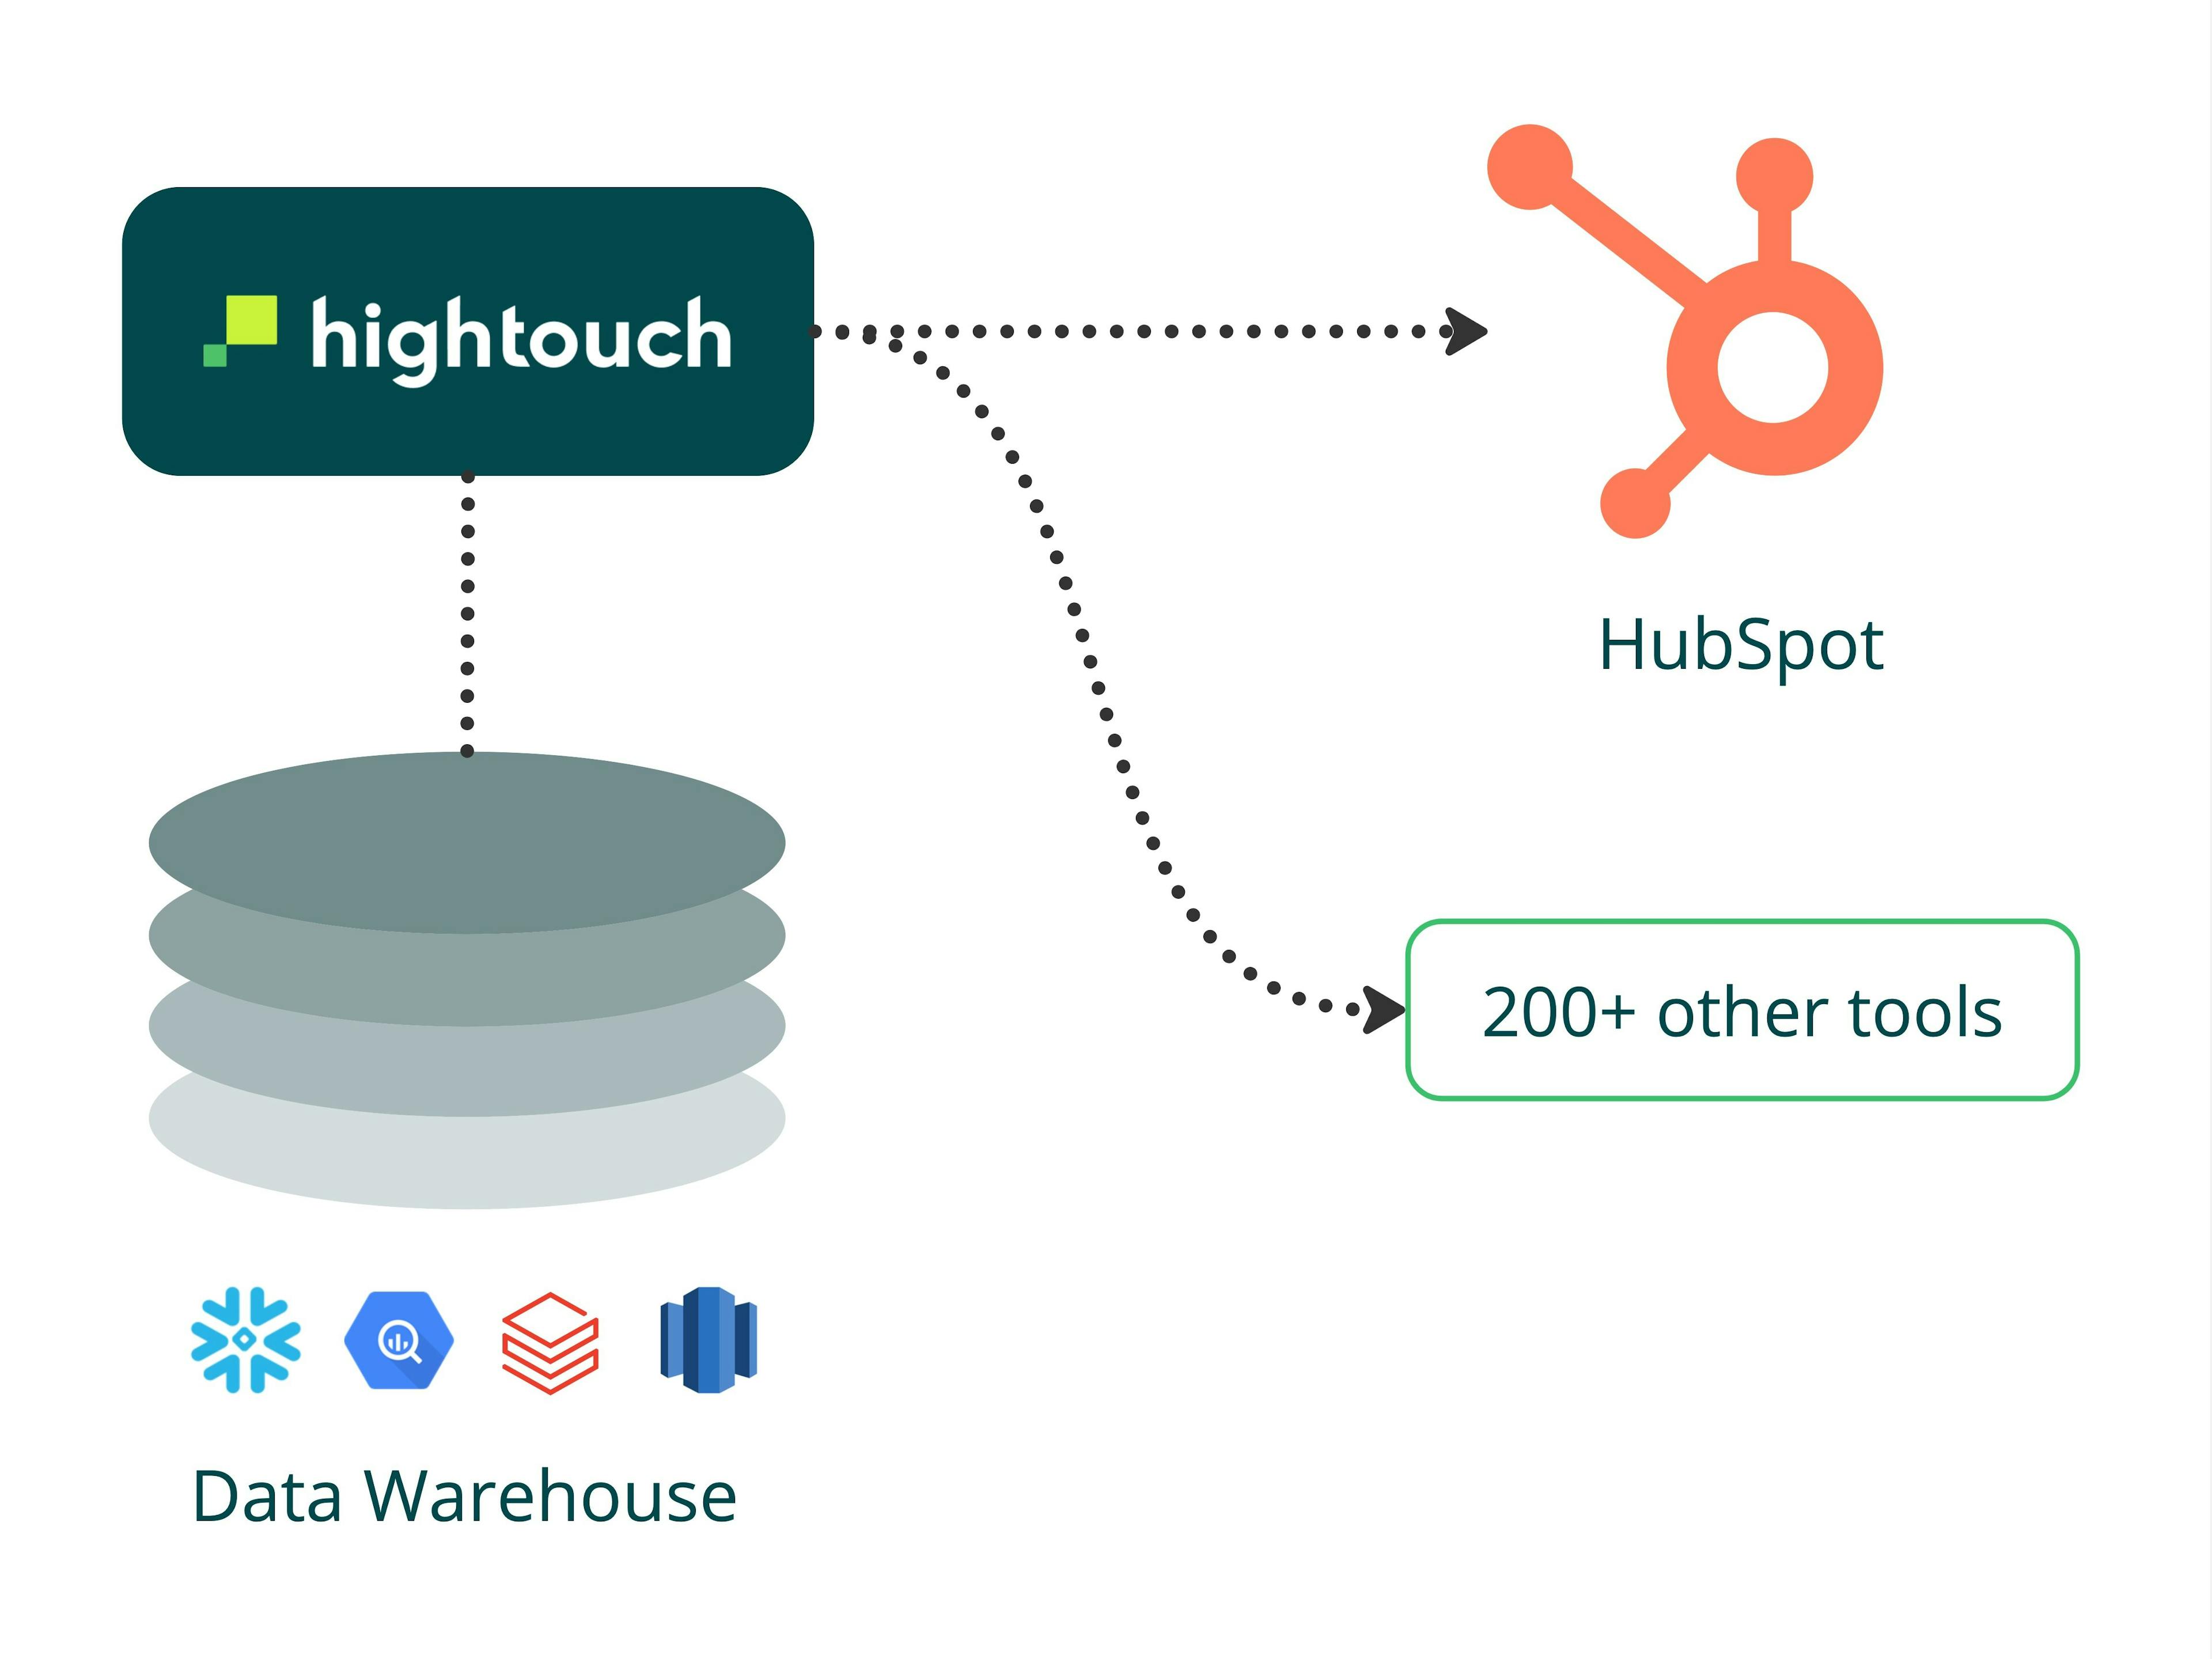 Hightouch powers HubSpot with data from the warehouse